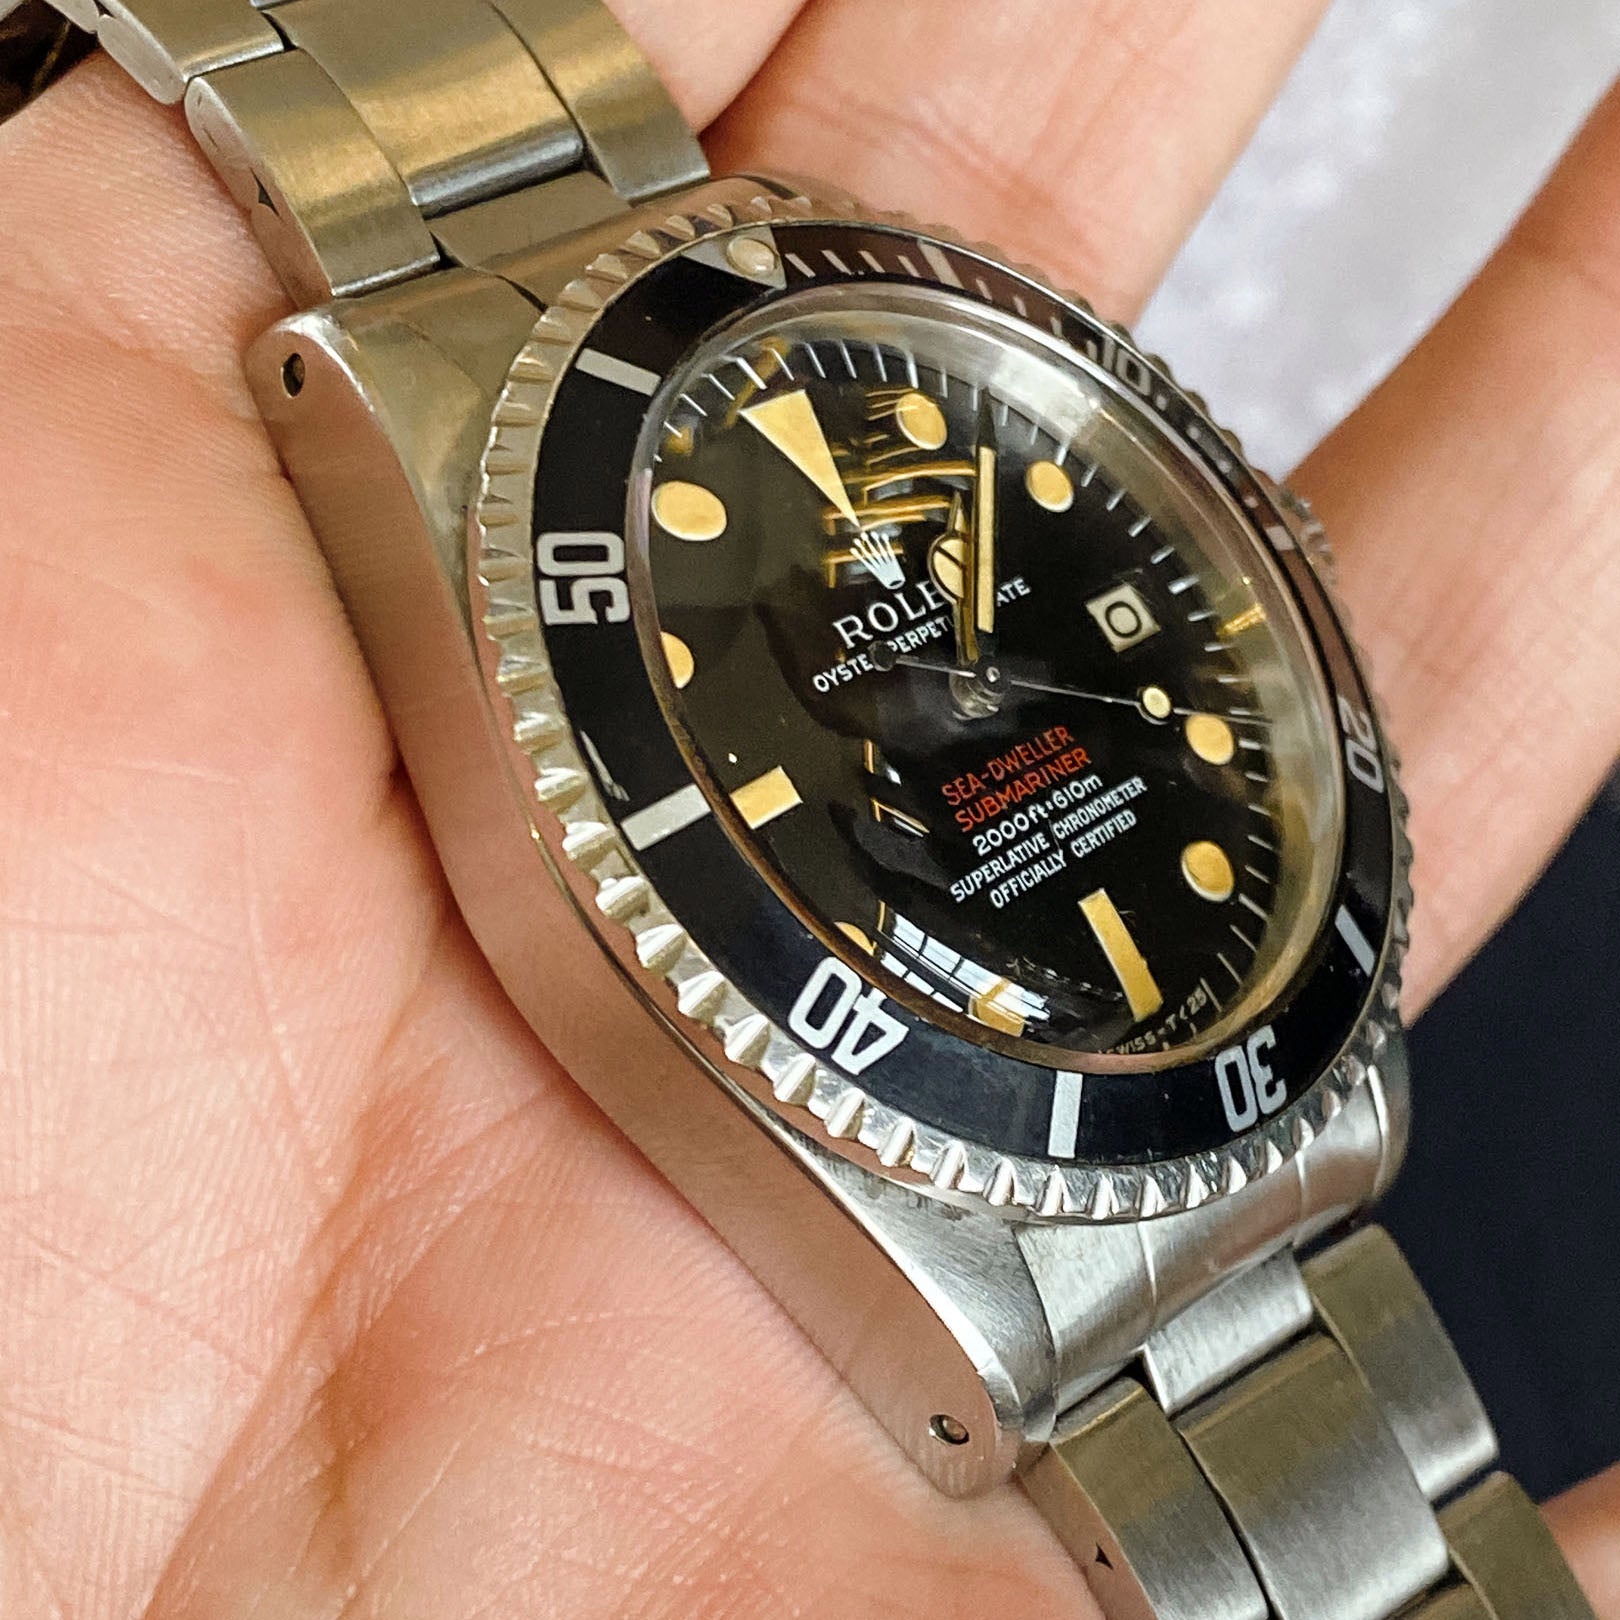 A extremely rare Prototype Rolex 1665 DRSD Seadweller Patent Pending